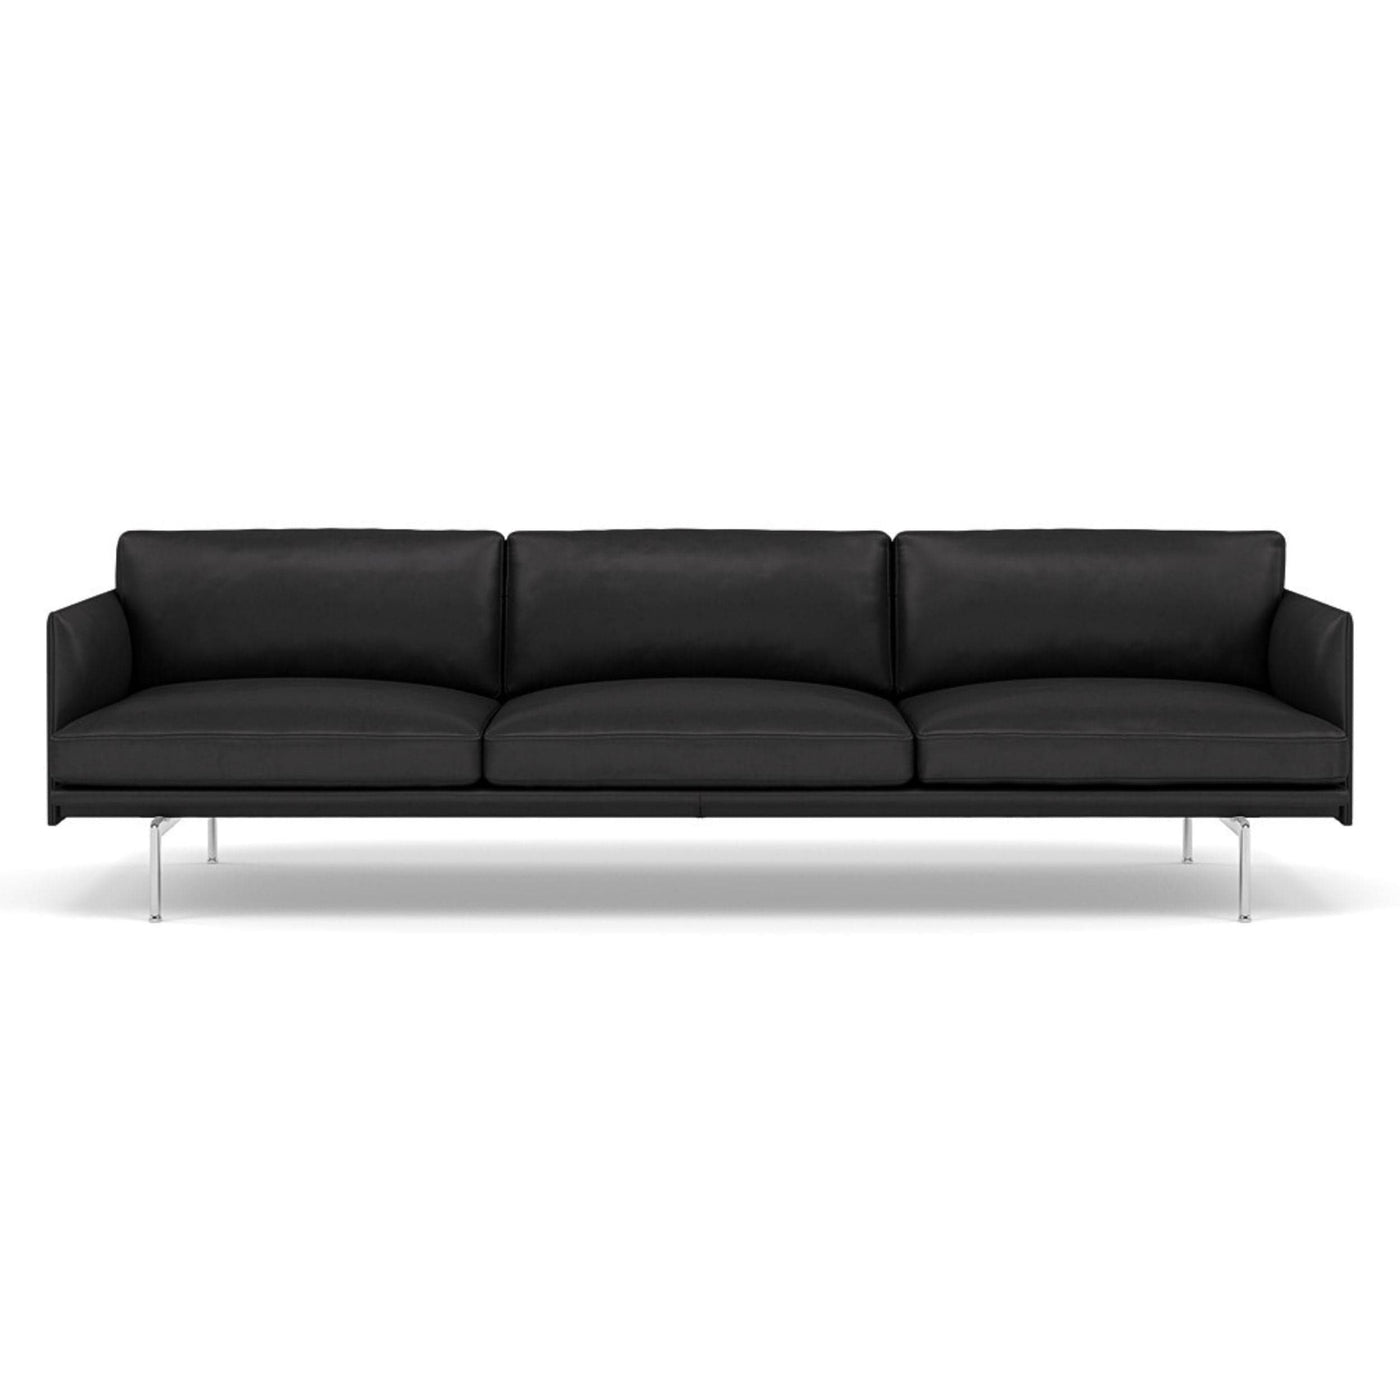 muuto outline 3.5 seater sofa in black refine leather and polished aluminium legs. Made to order from someday designs. #colour_black-refine-leather